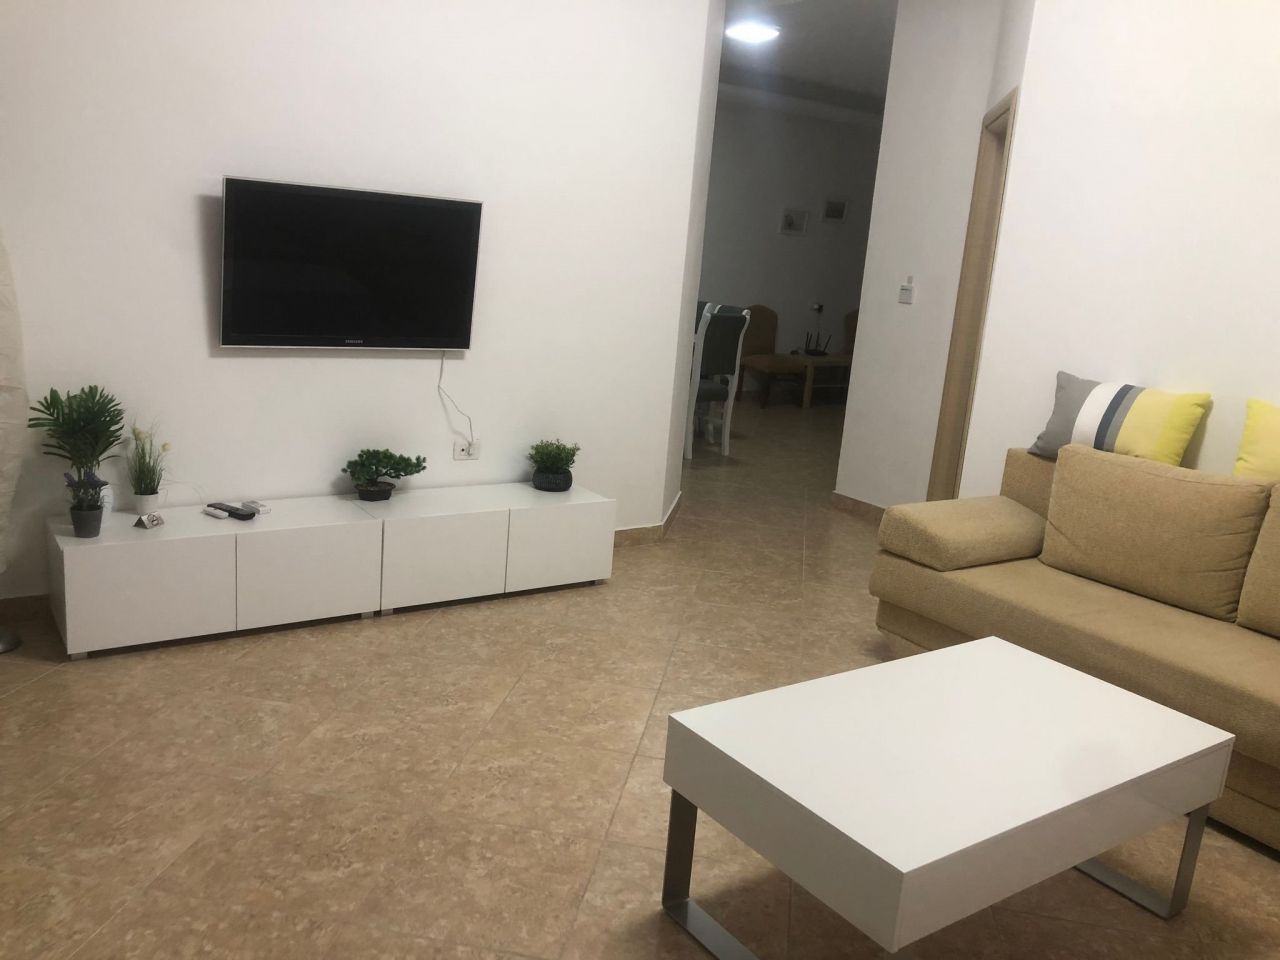 Holiday in Albania. Apartment for rent in Saranda